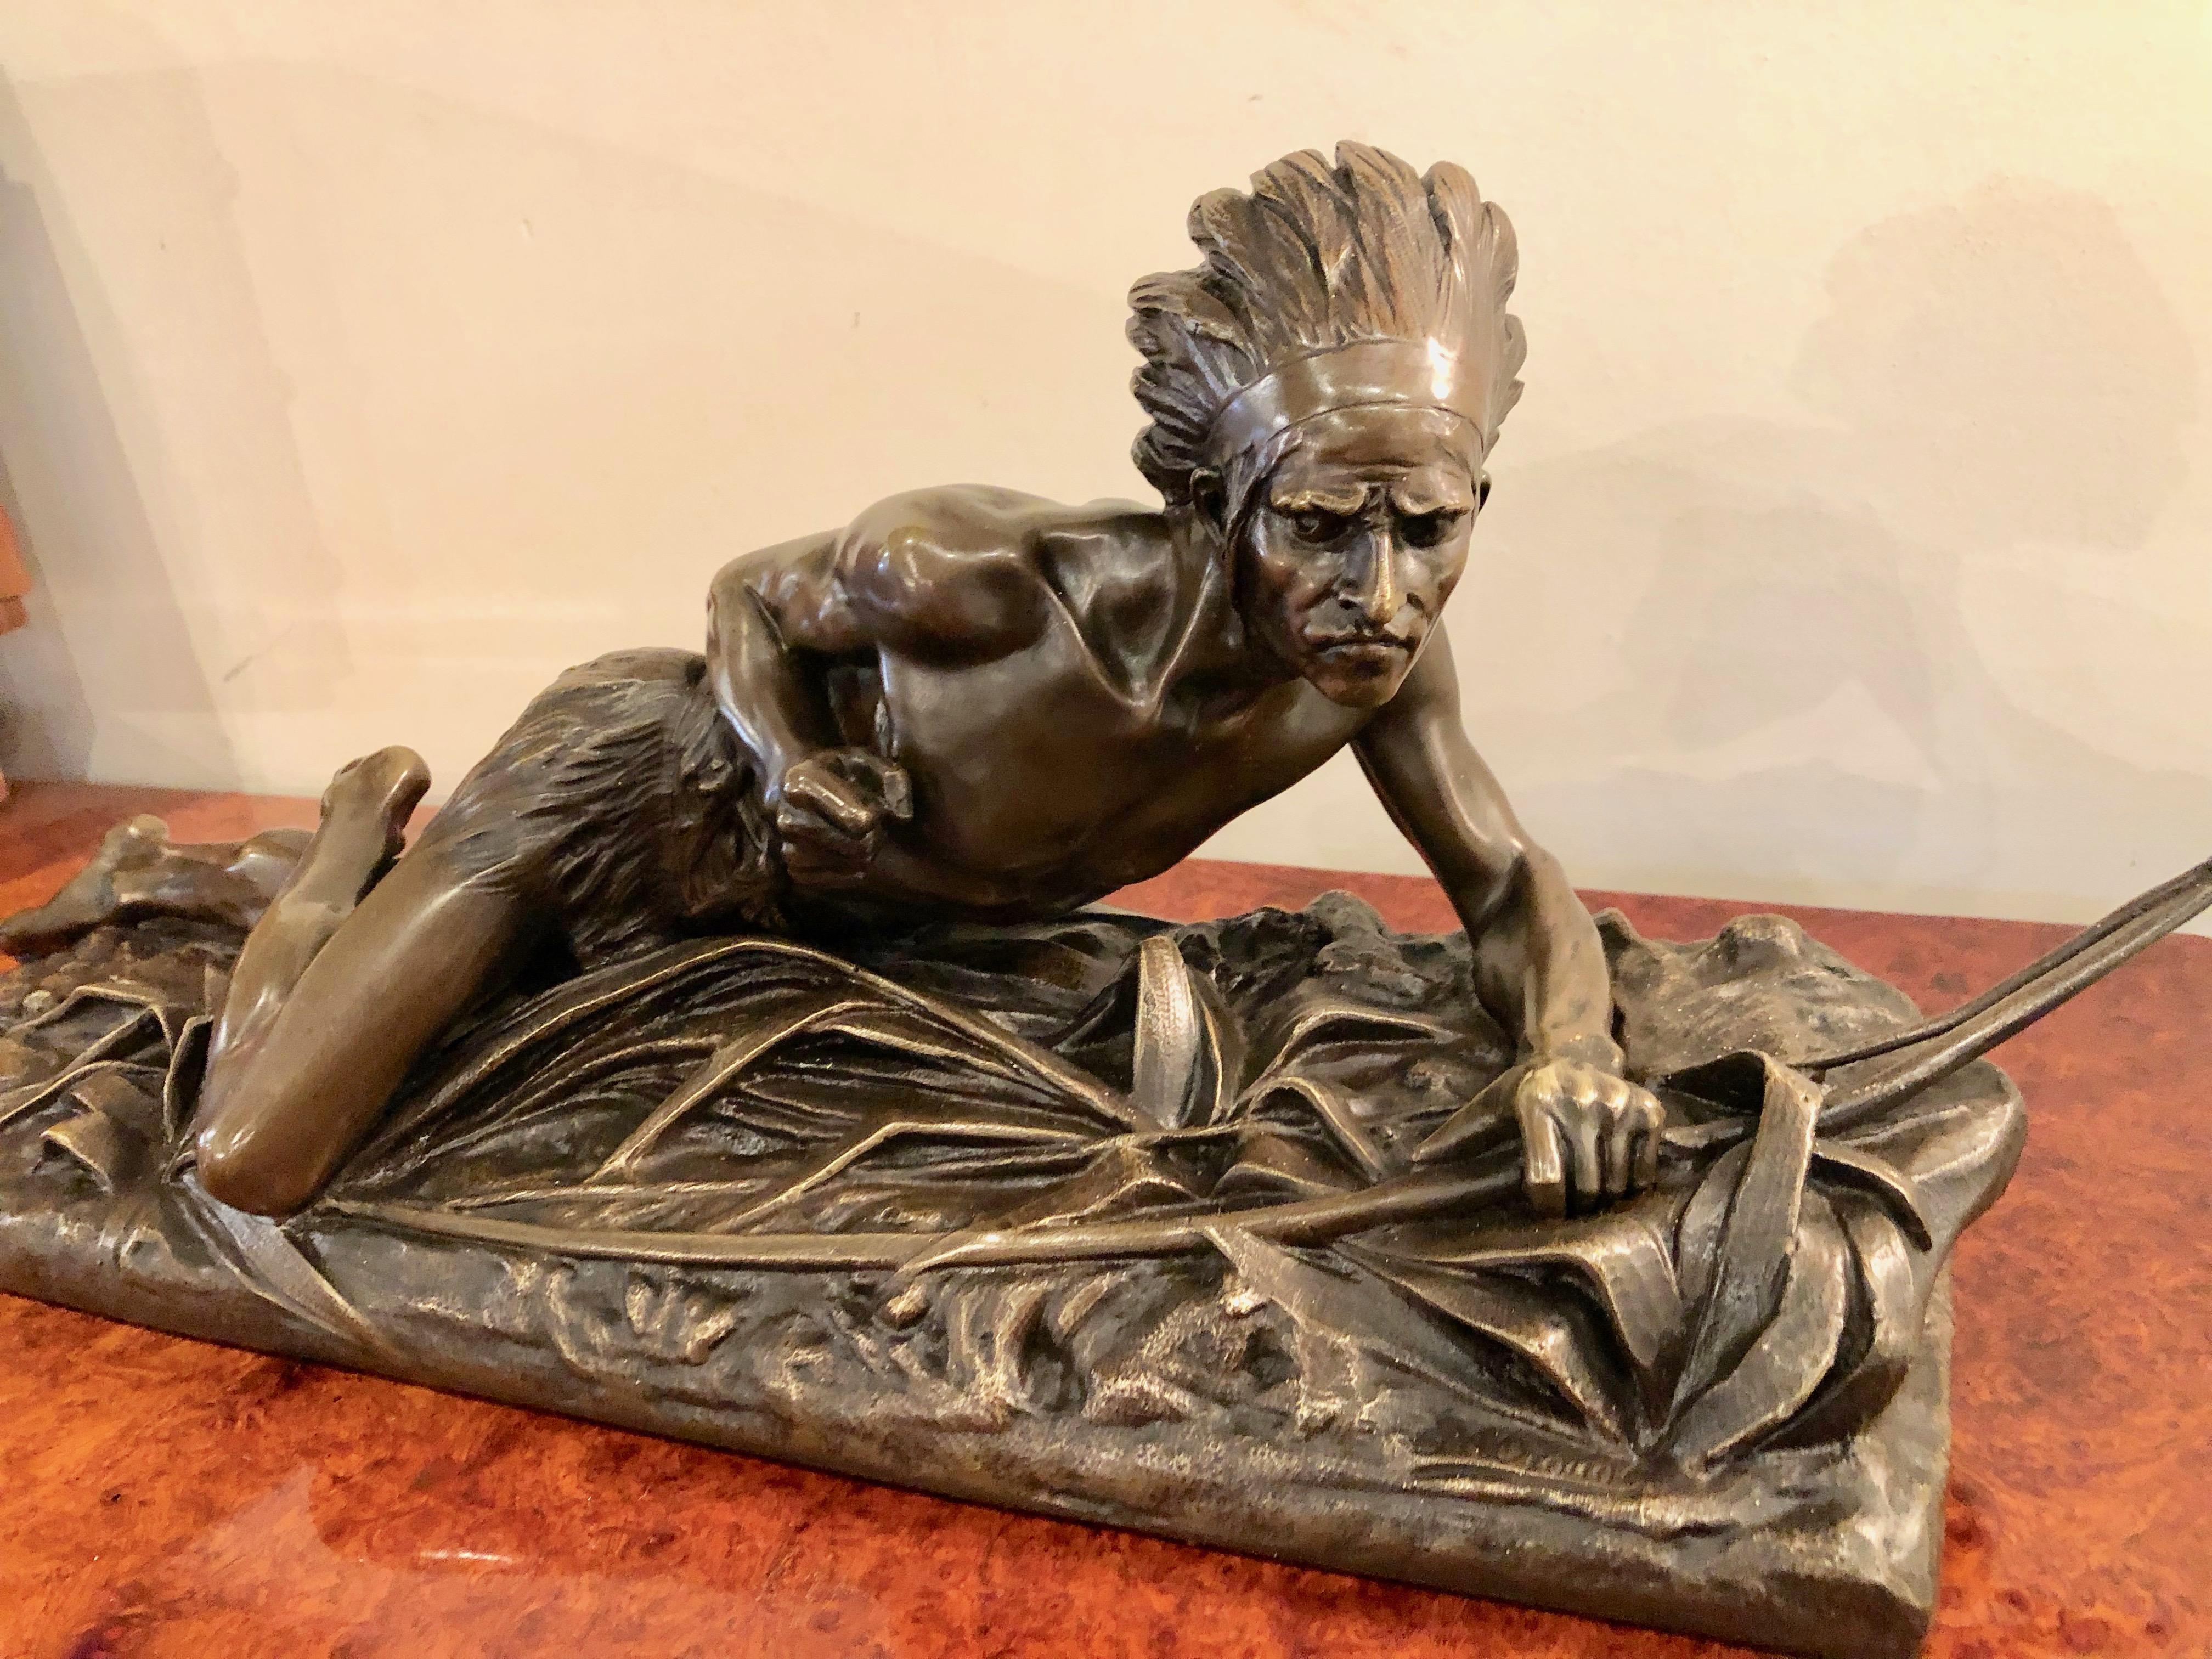 Indian bronze signed E. Drouot. Cast with plenty of detail depicting an Indian man who is on the look out while holding a bow in hunting position. Drouot did multiple sculptures rendering the American Indian theme.

Edouard Drouot was born in